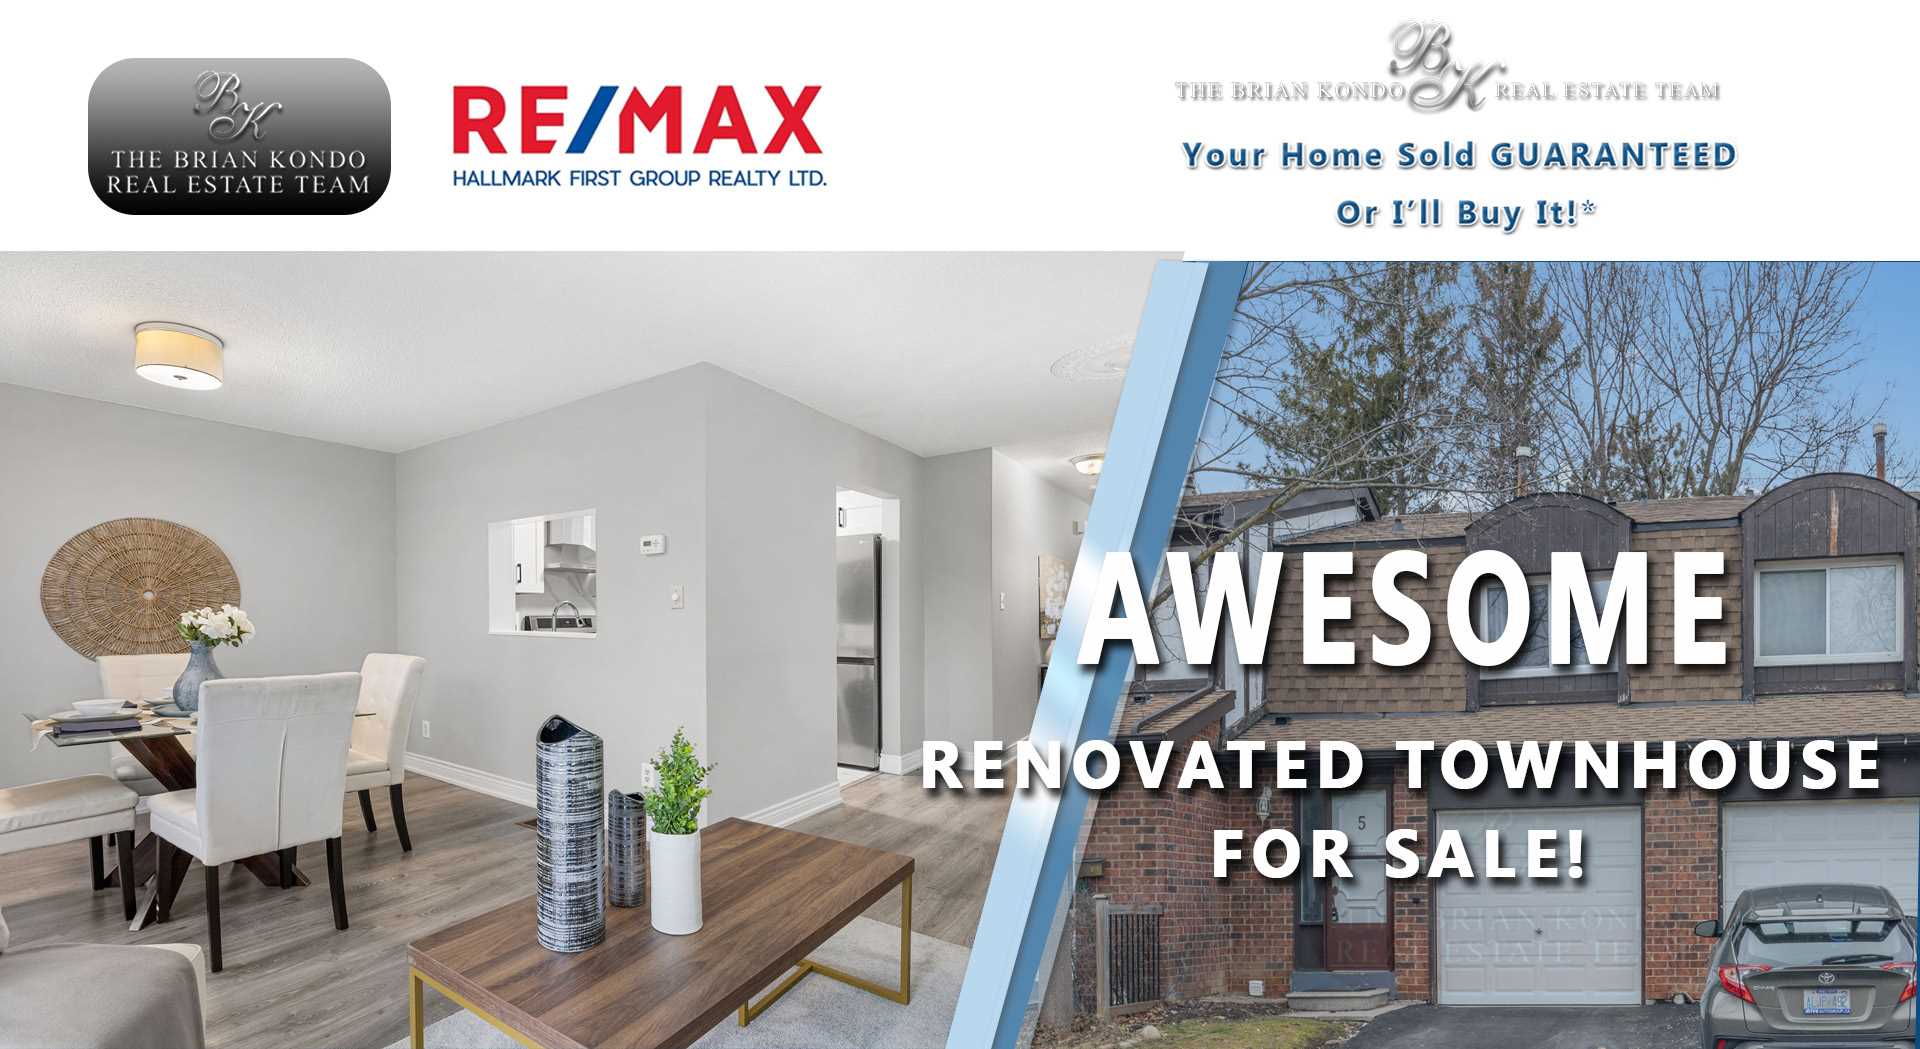 AWESOME RENOVATED TOWNHOUSE FOR SALE! | The Brian Kondo Real Estate Team